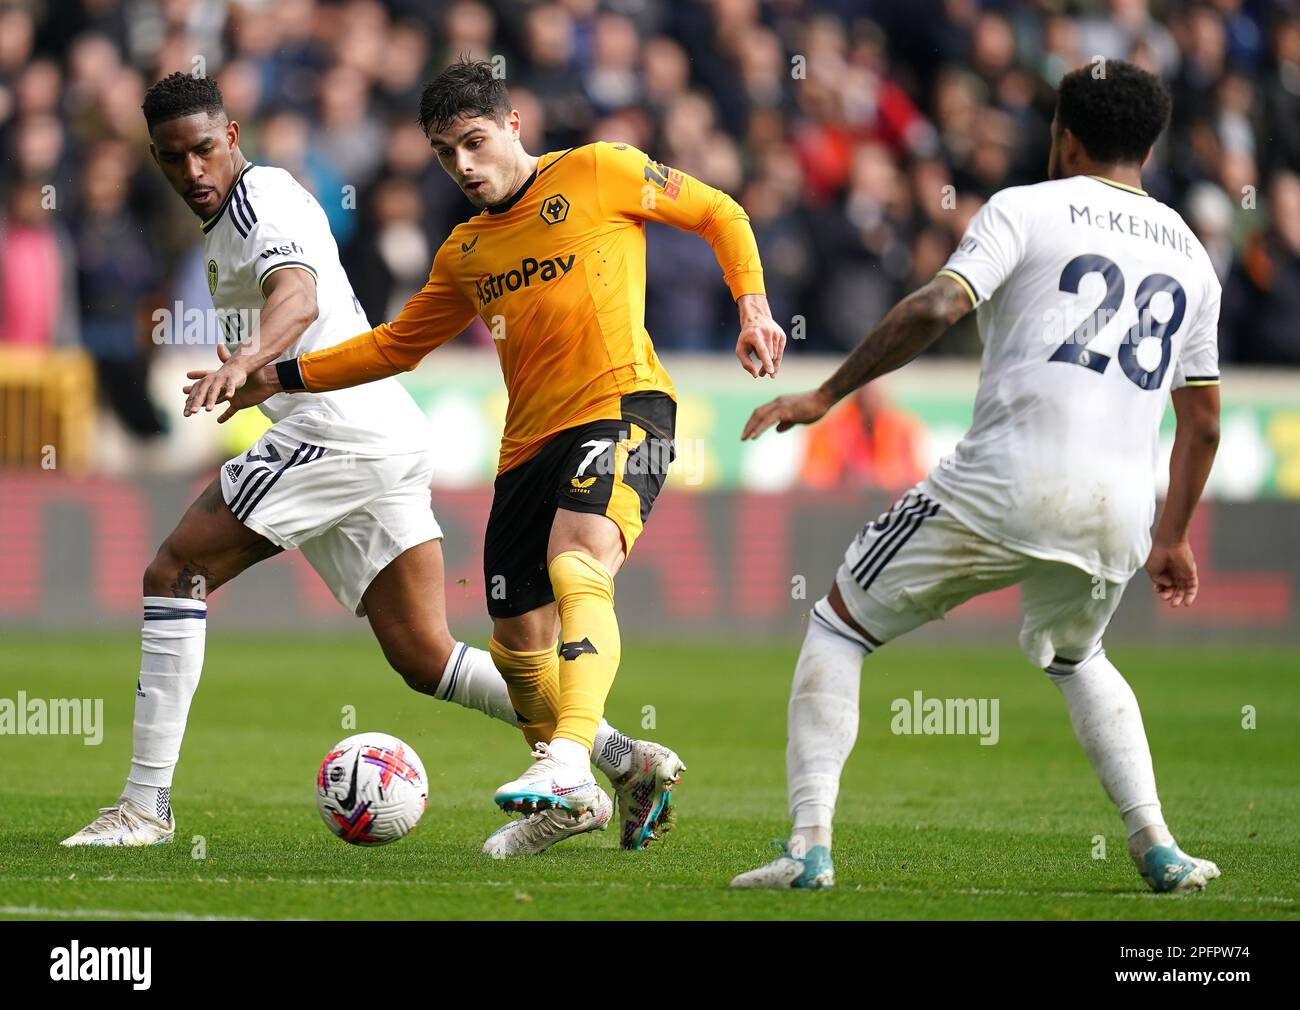 Wolverhampton Wanderers' Pedro Neto (centre) battles for the ball with Leeds United's Junior Firpo (left) and Weston McKennie during the Premier League match at Molineux Stadium, Wolverhampton. Picture date: Saturday March 18, 2023. Stock Photo